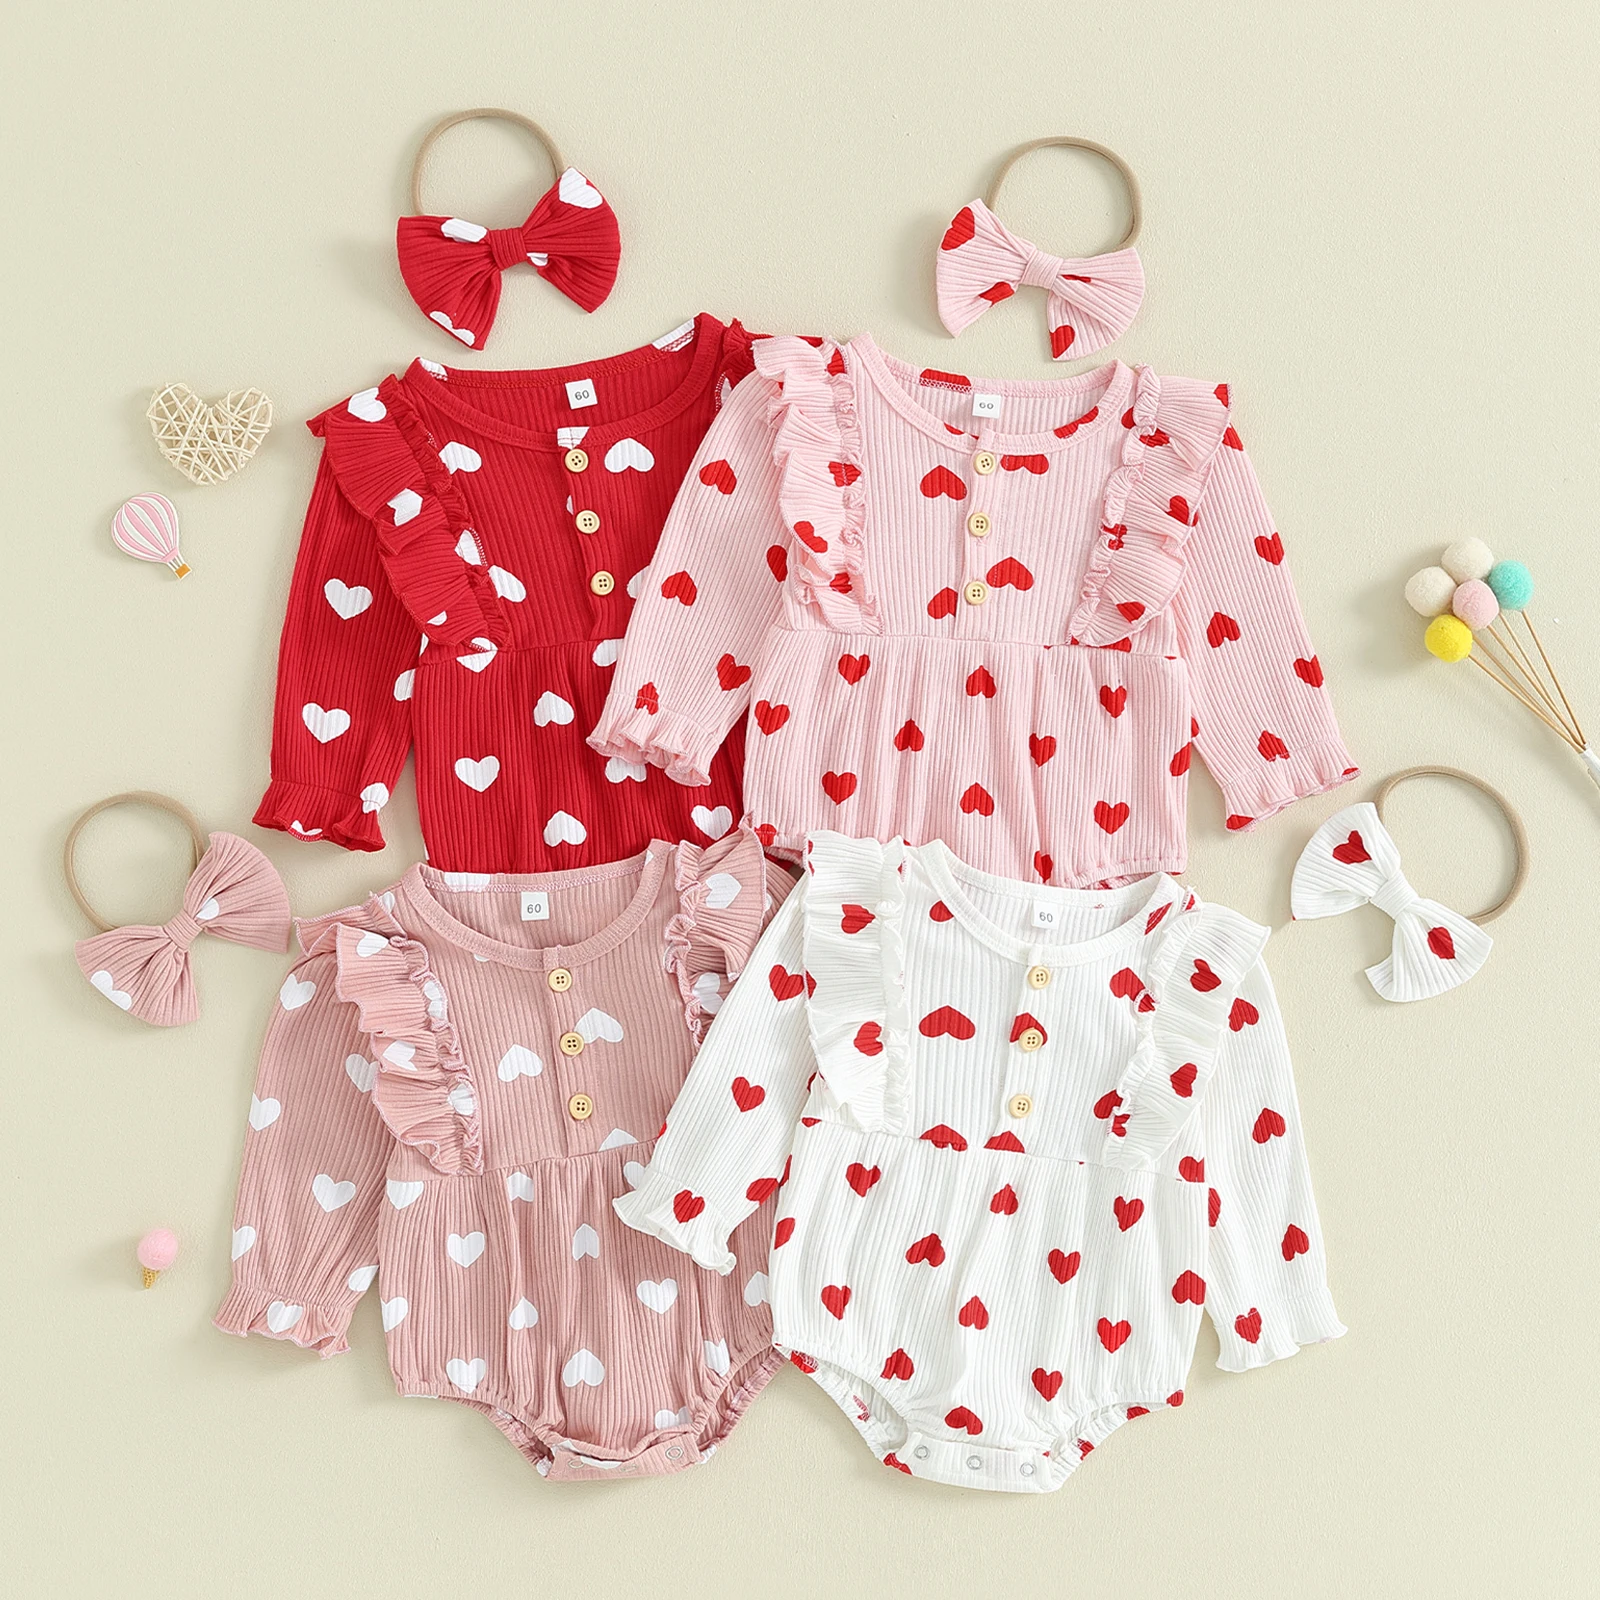 

Baby Girls Valentine's Day Outfits Knitted Ruffle Romper Long Sleeve Heart Print Button Bodysuits with Headband Sweety Clothes